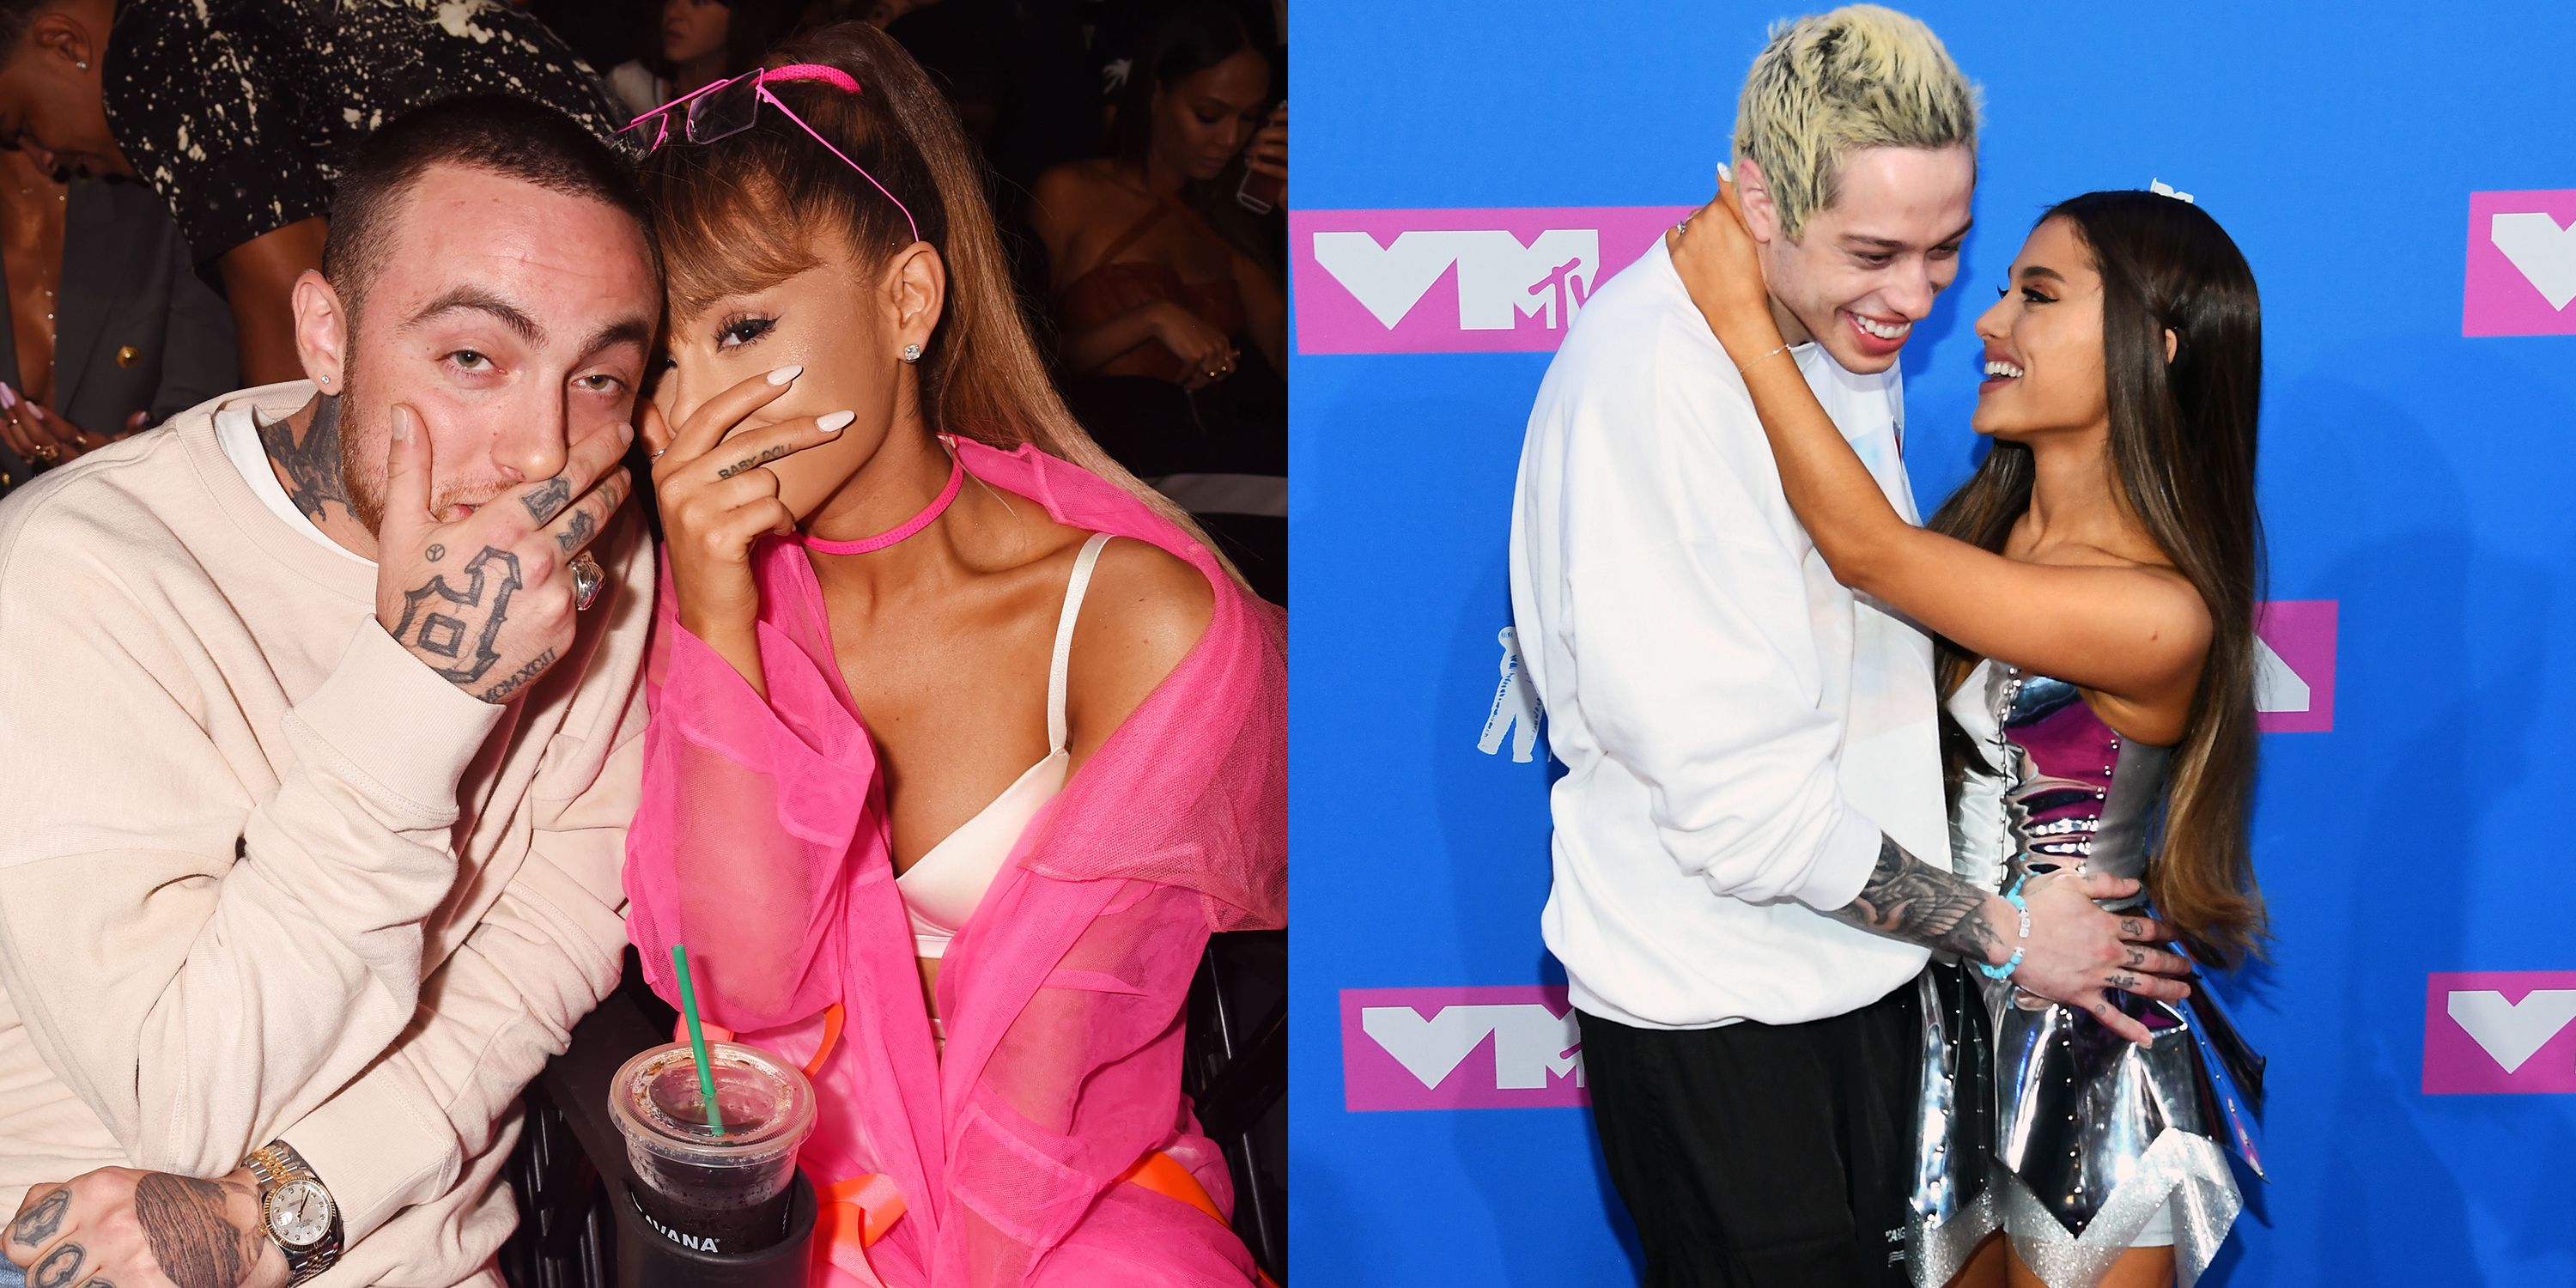 Ariana Grande Releases New Single Imagine Is Imagine About Mac Miller Or Pete Davidson